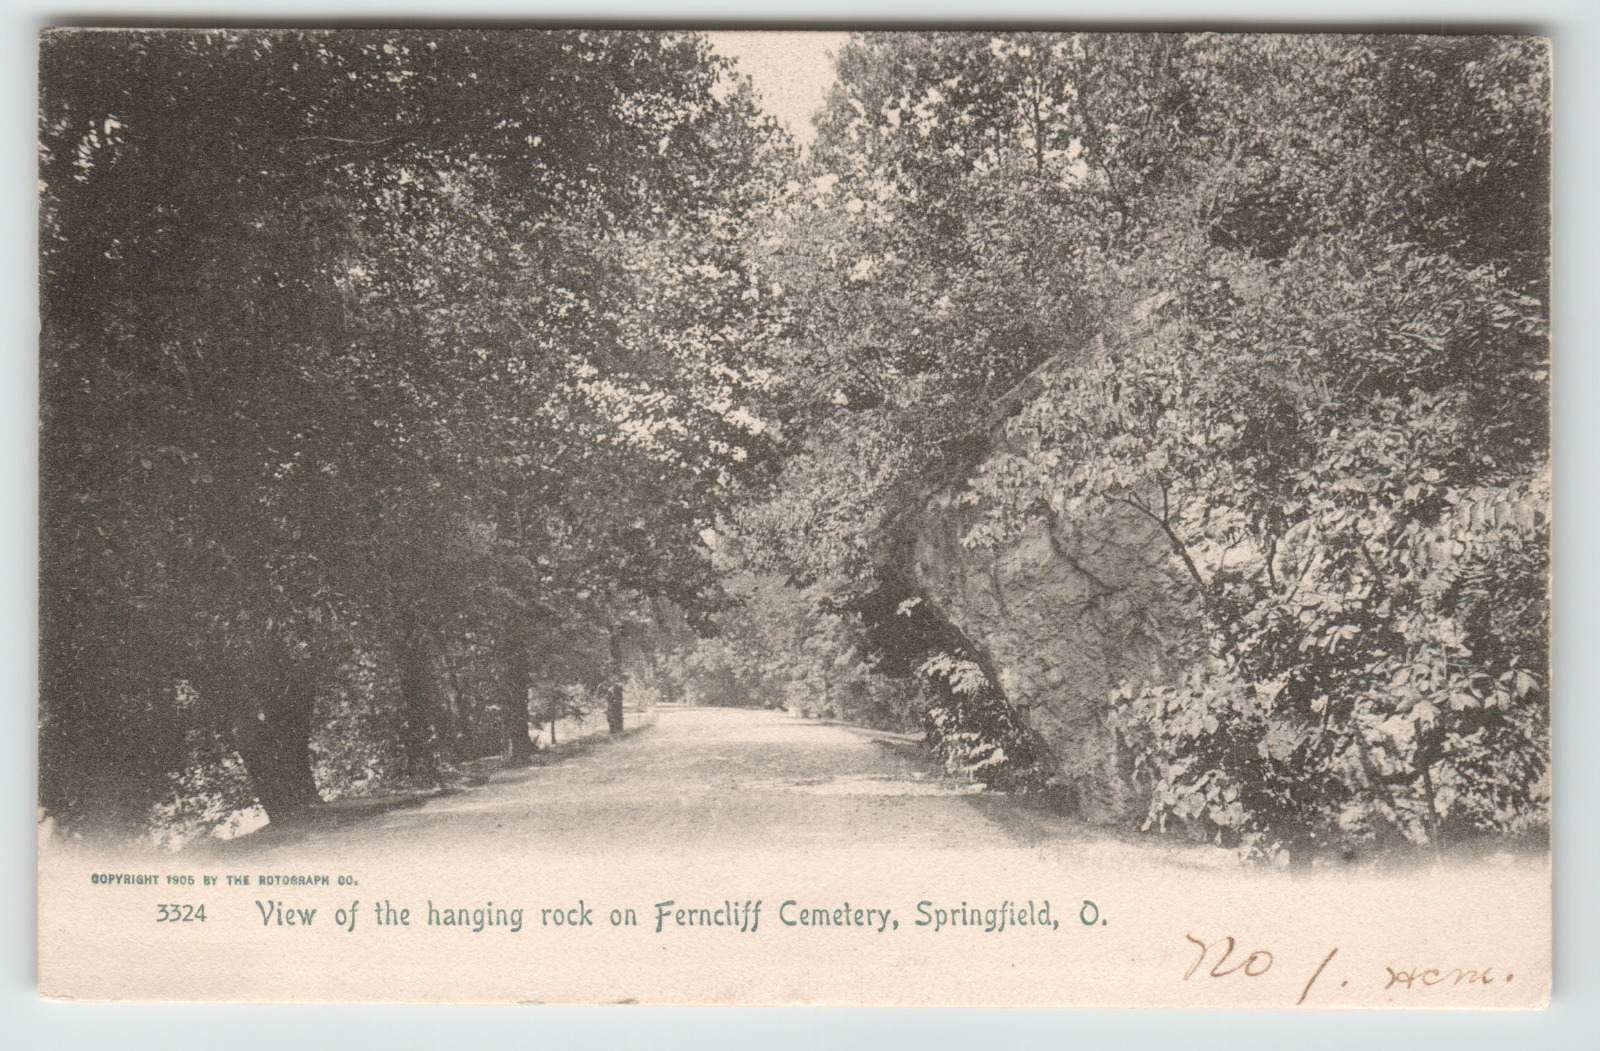 Postcard RPPC 1905 Hanging Rock Ferncliff Cemetery Springfield, OH